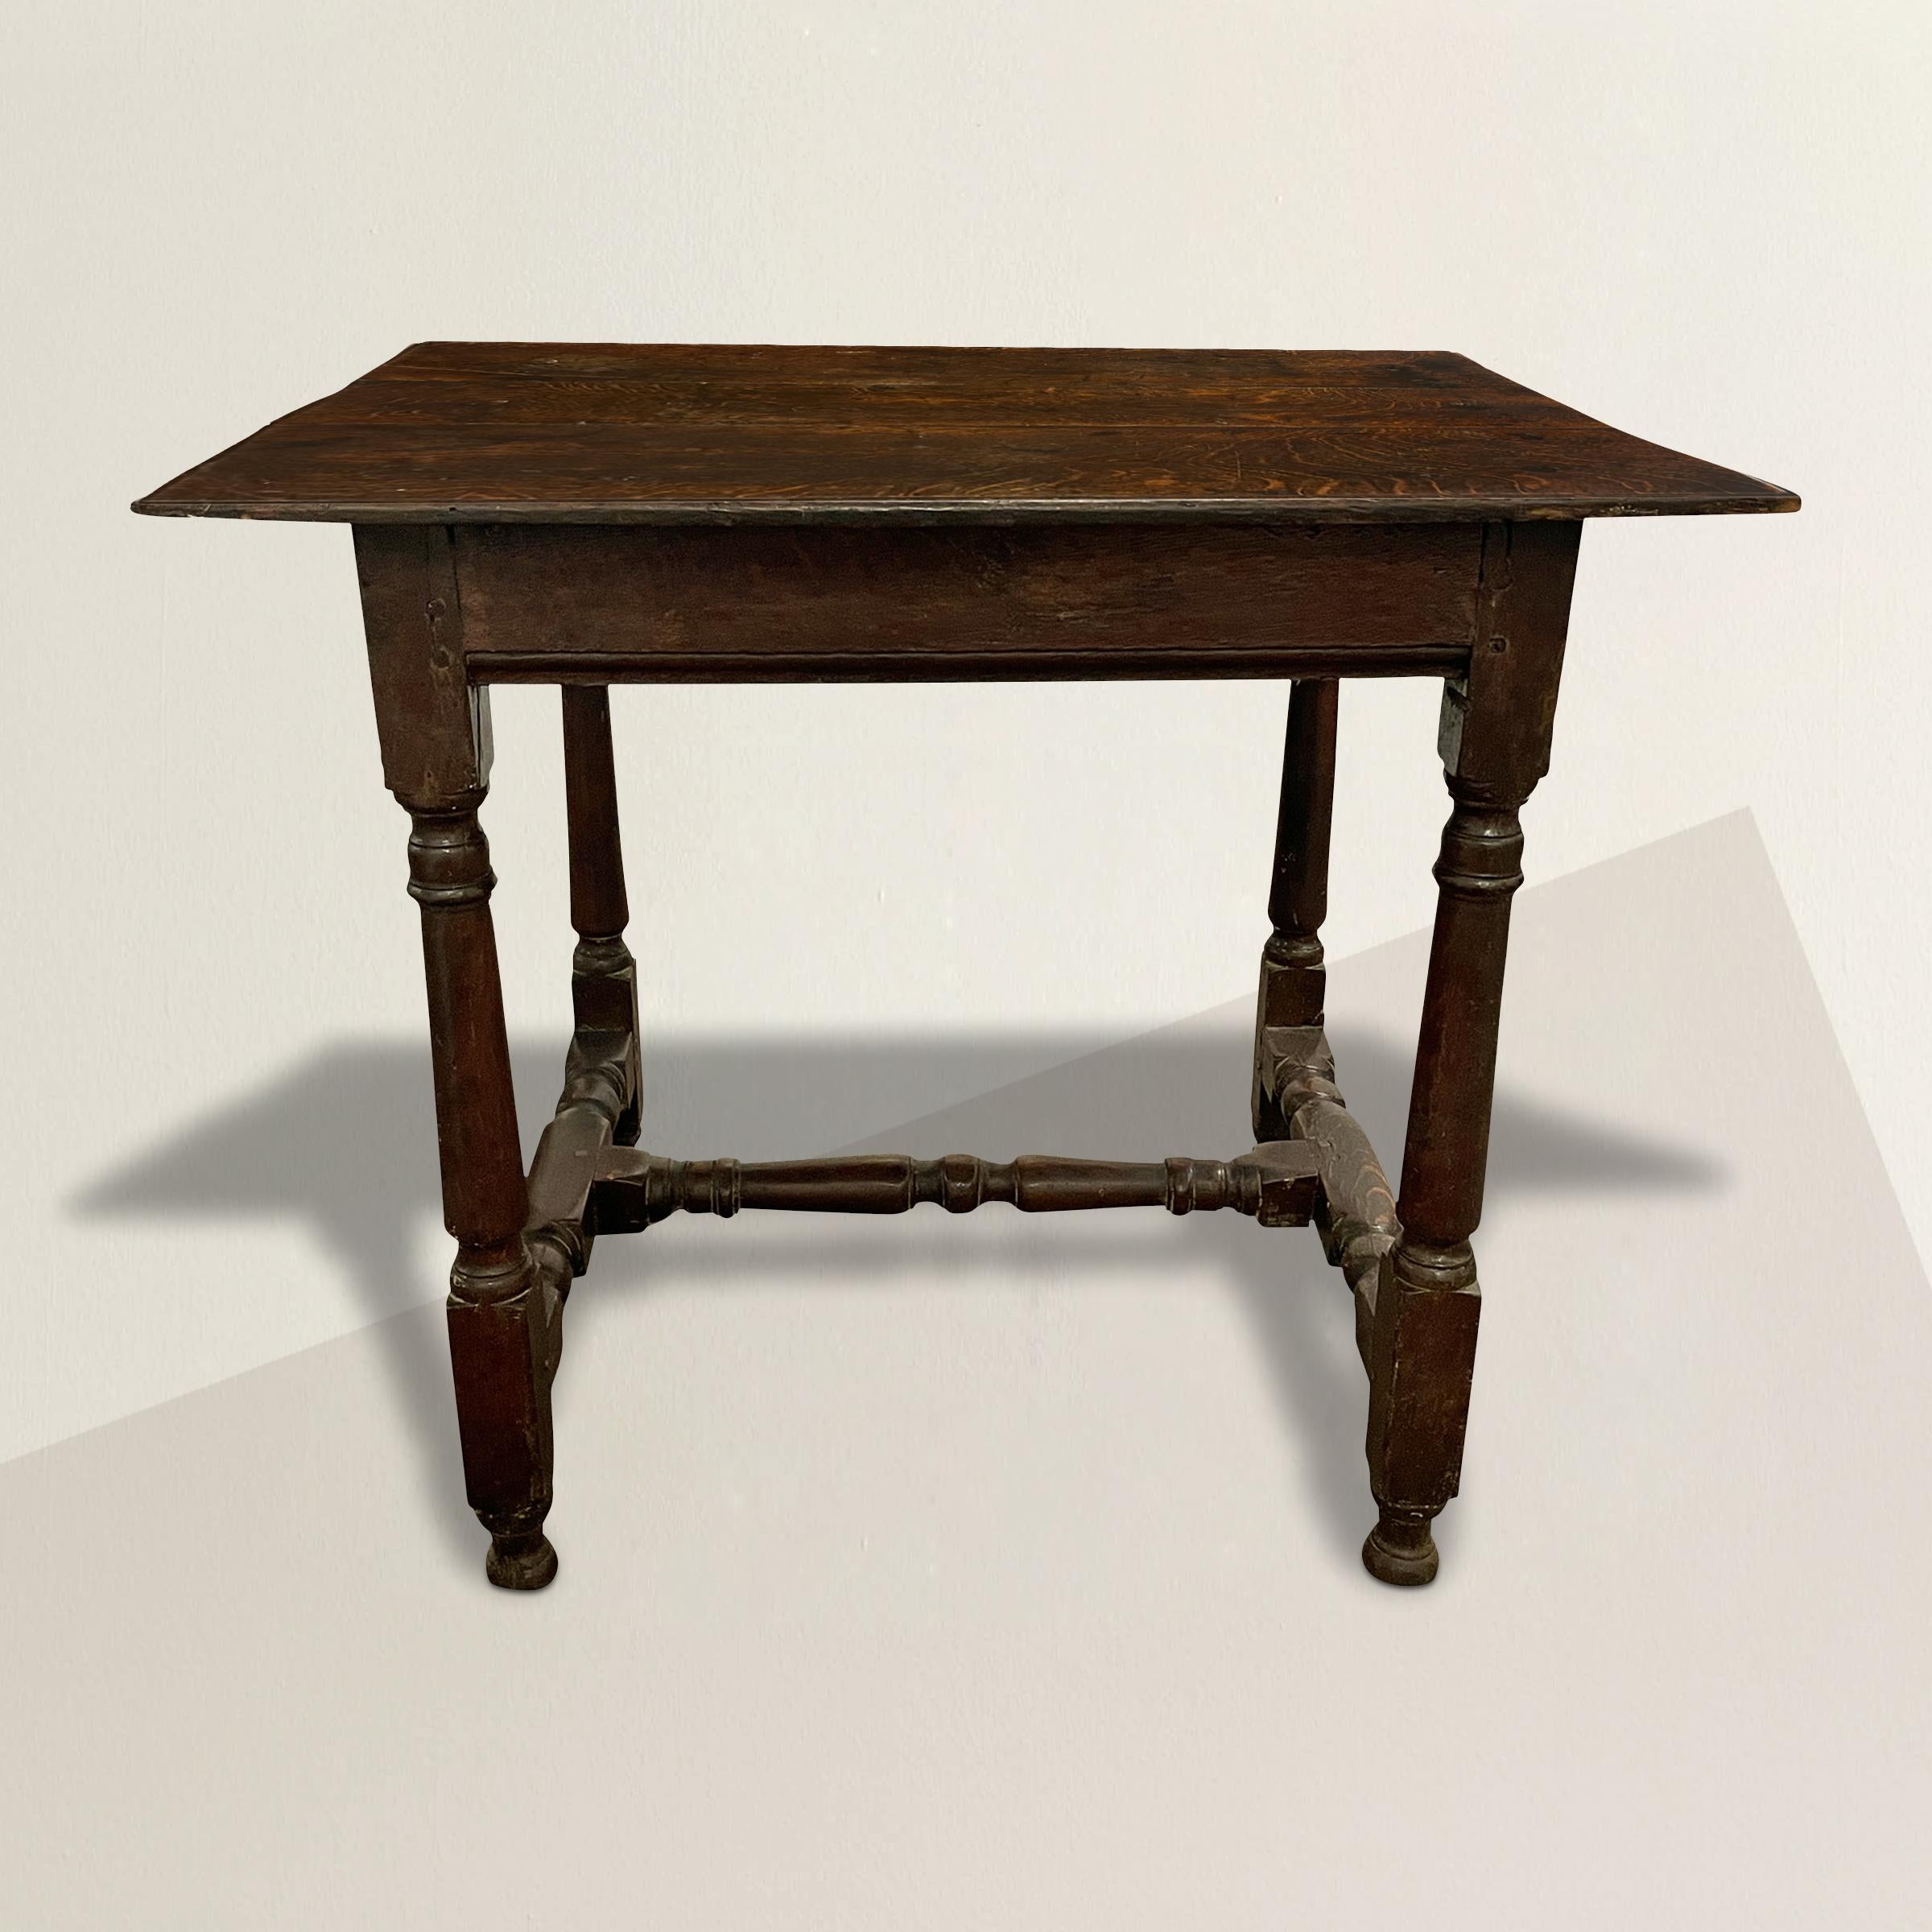 A remarkable 17th century English William and Mary oak table with a three-plank top over a plain frieze, and with tapered turned legs, turned stretchers with a well worn surface, and raised on turned feet. The perfect side or end table next to your